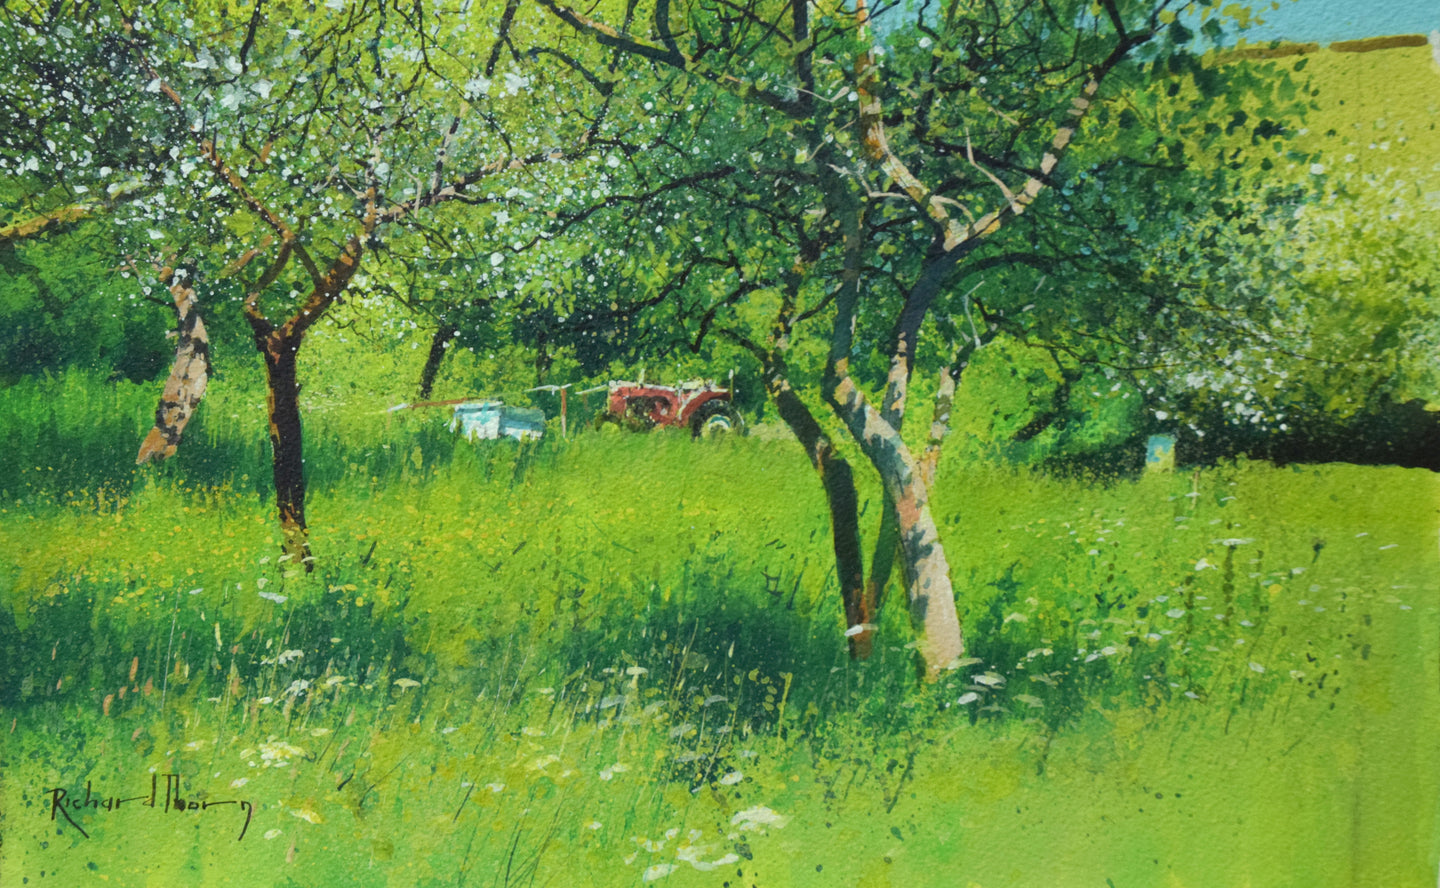 Vibrant green painting with several fruit trees in blossom, with some bee hives and a red tractor in the centre.